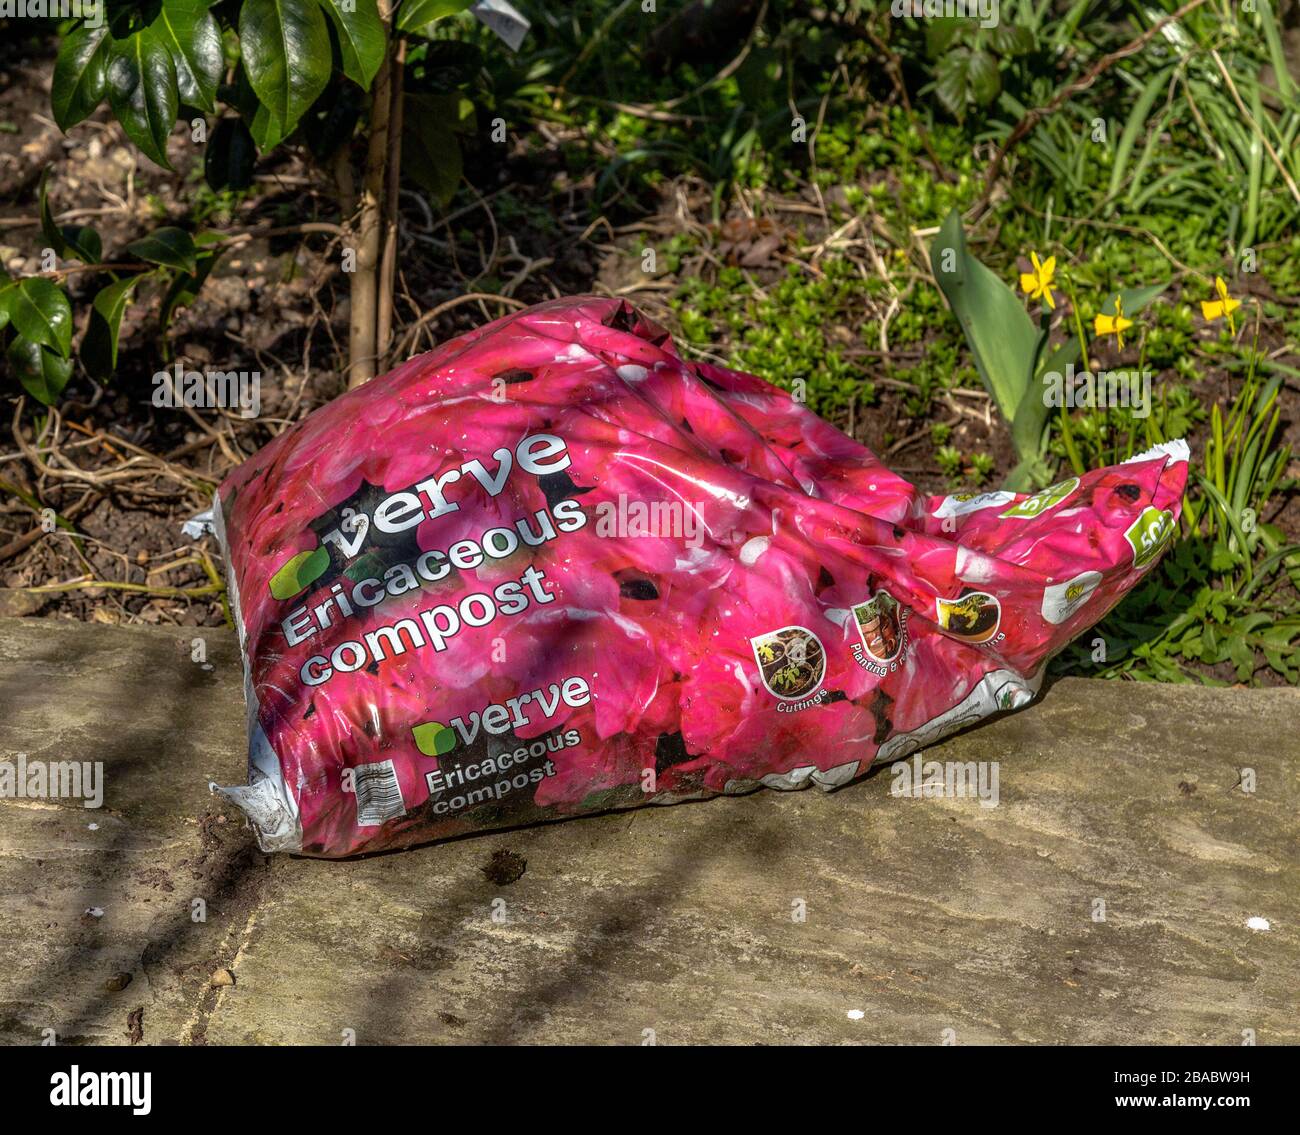 A bag of ericaceous compost next to flower bed. Stock Photo